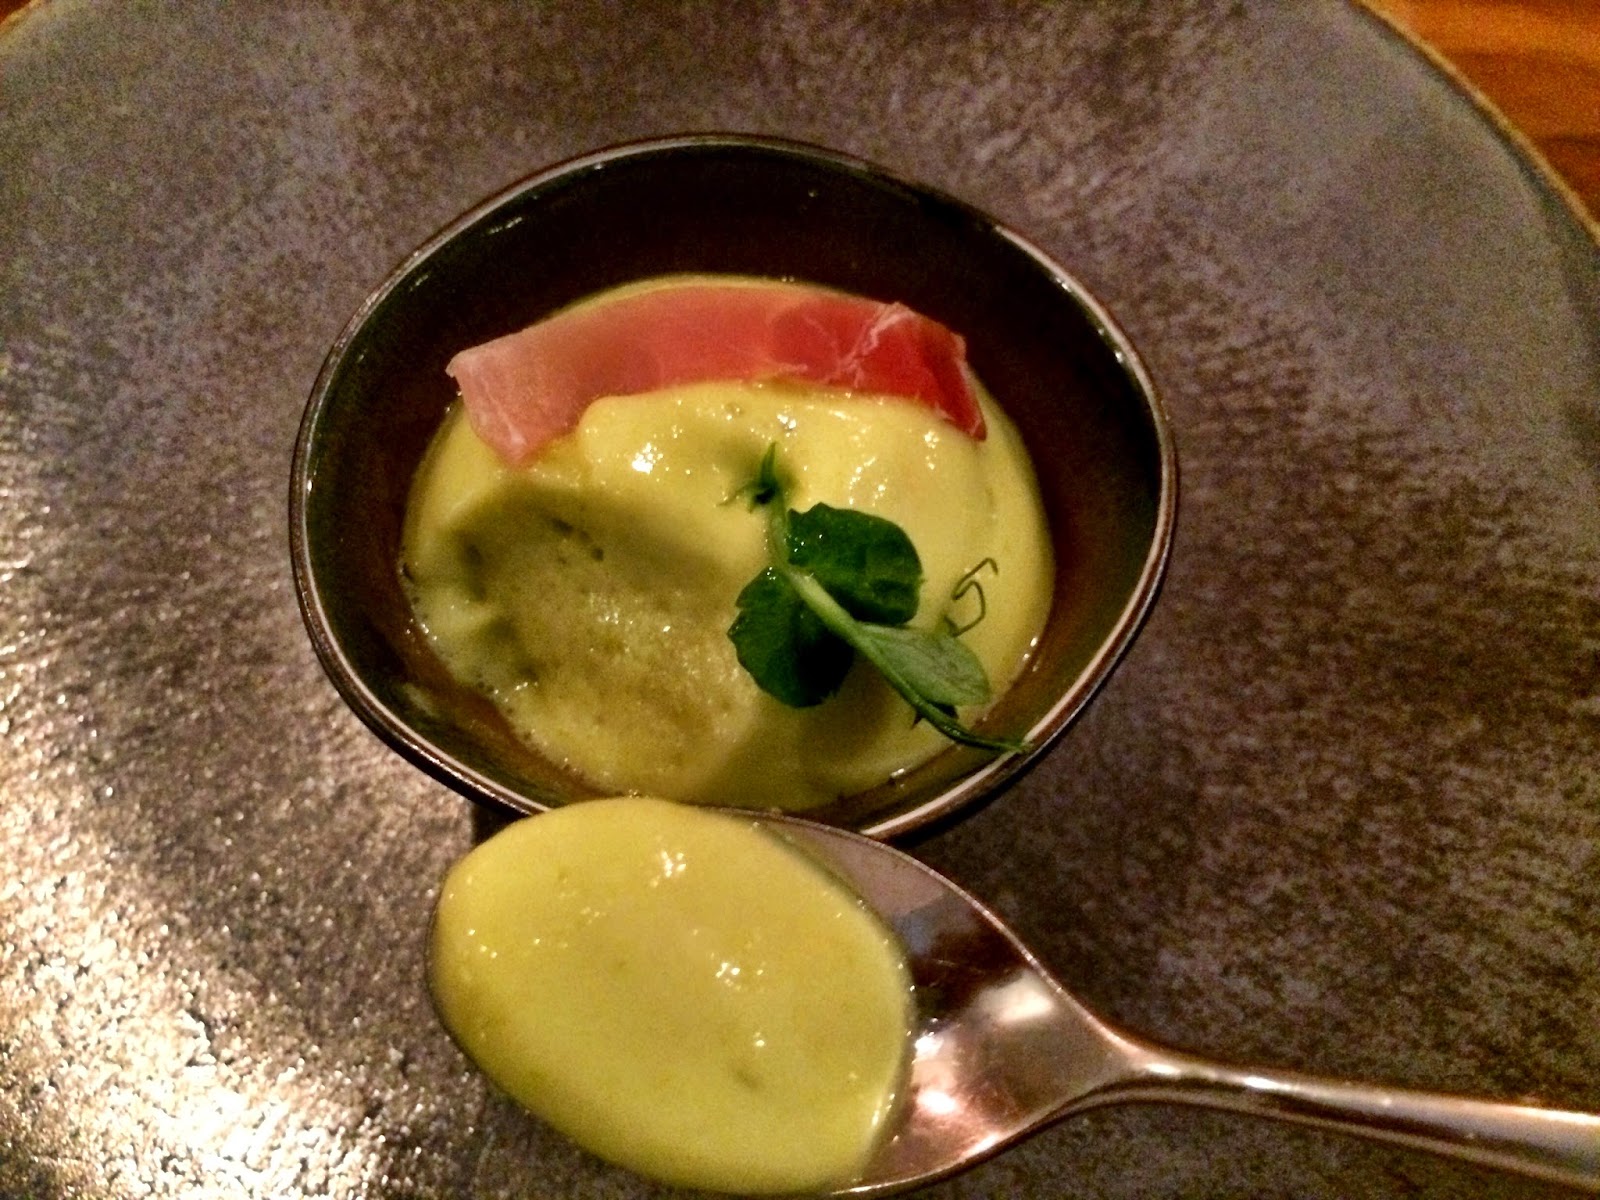 pea and pancetta mousse - The Artichoke